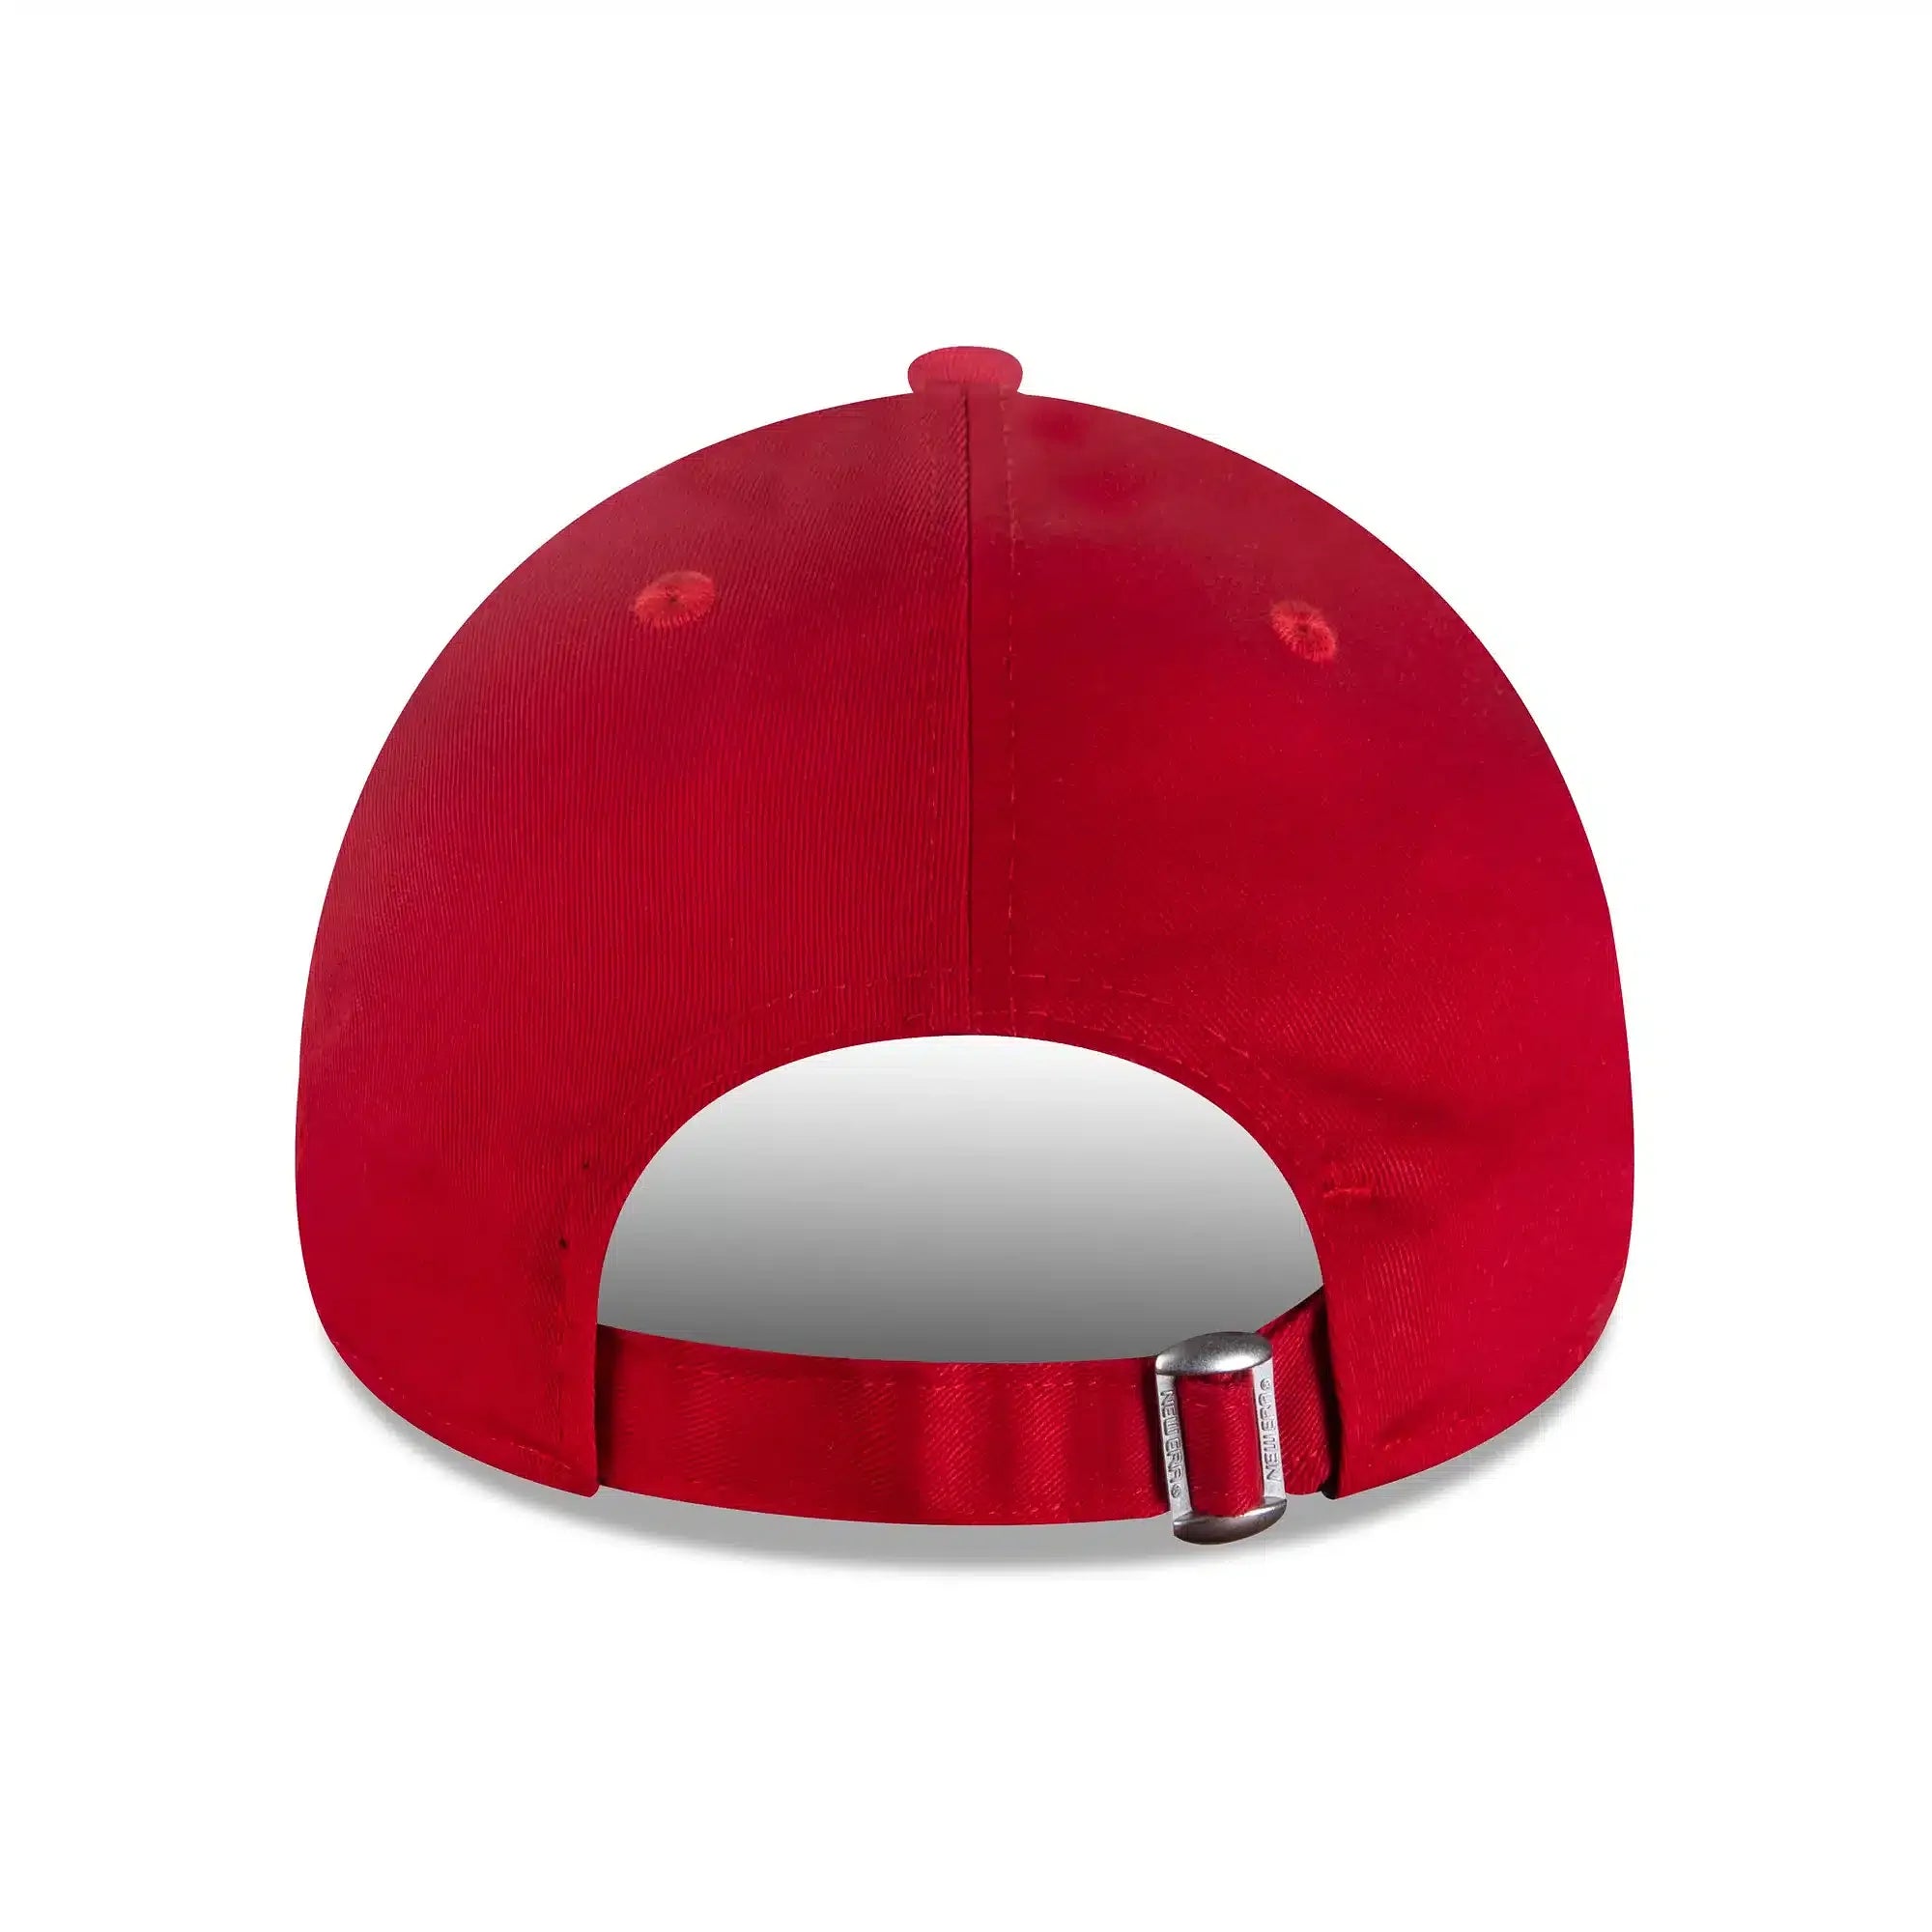 New York Yankees Essential Red 9FORTY Cap